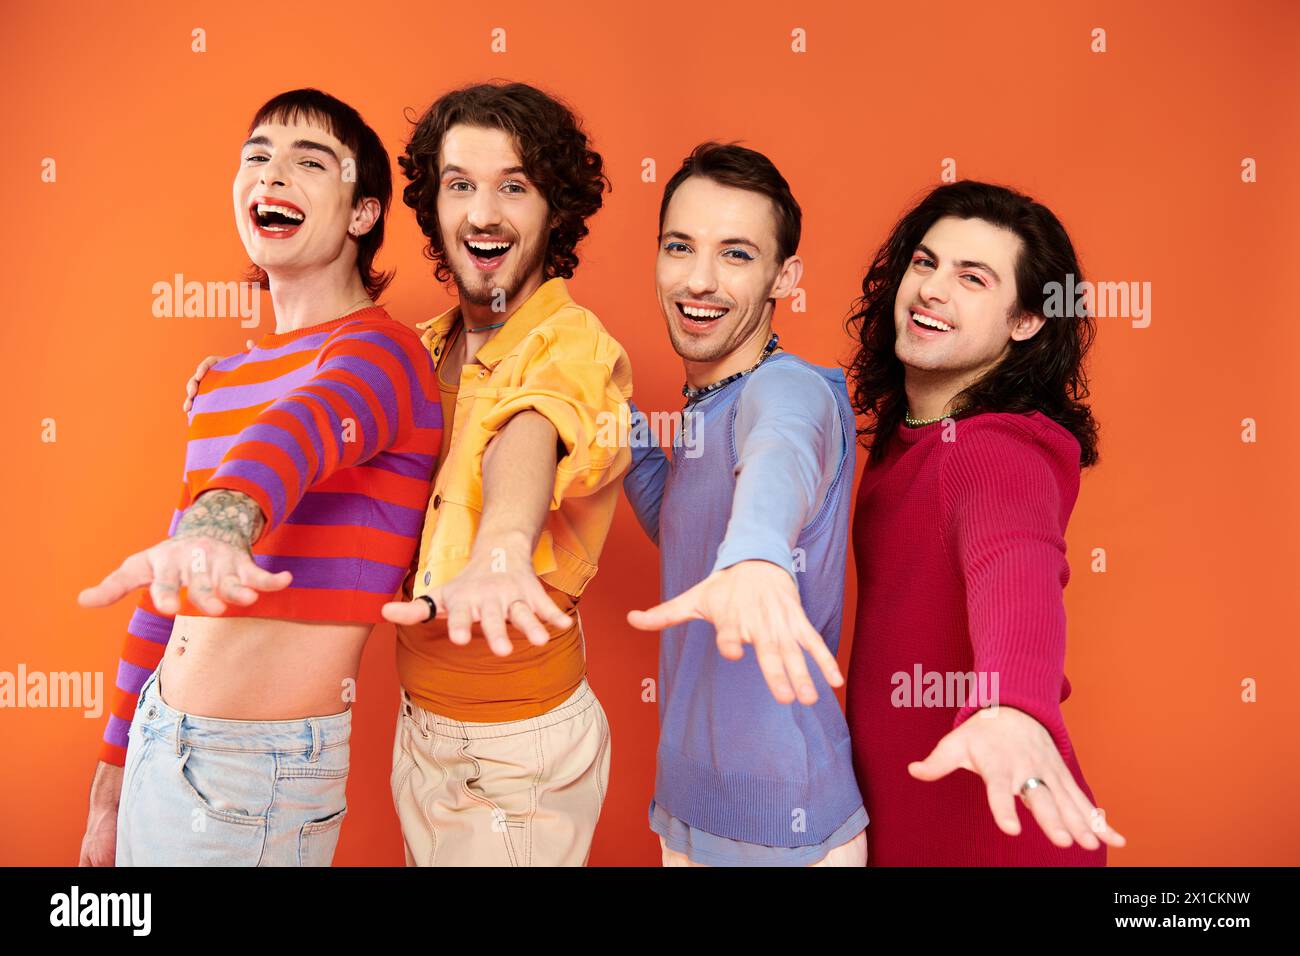 cheerful young gay men with makeup in vibrant attires posing actively together, pride month Stock Photo